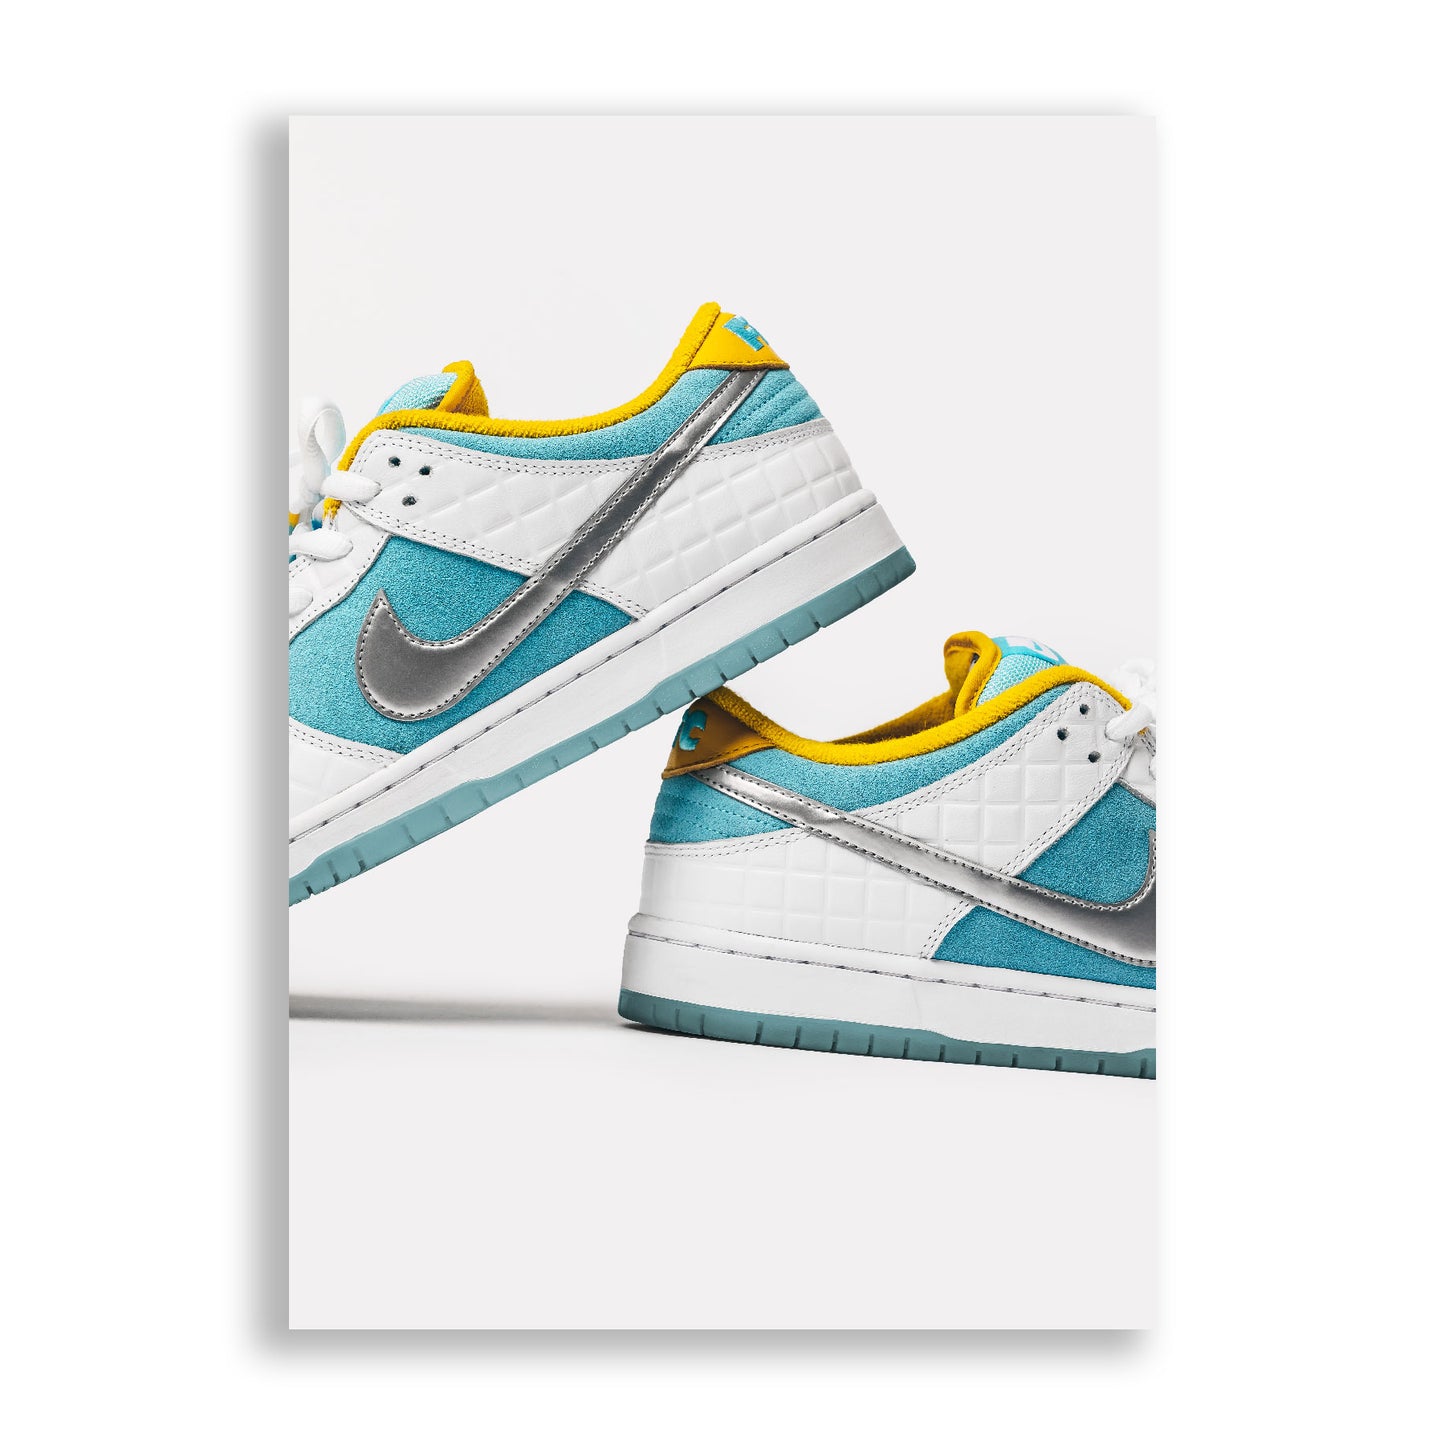 Image of Nike SB Dunk Low Pro FTC Sneaker Poster